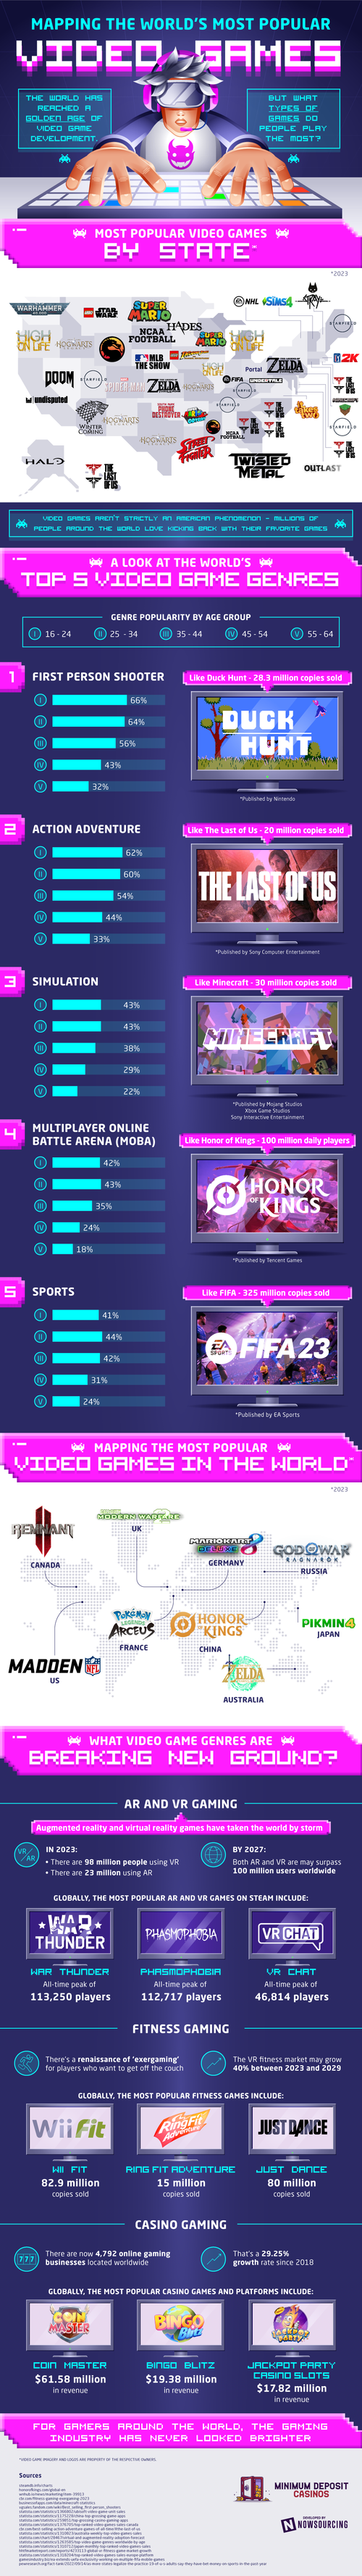 Mapping-the-Worlds-Most-Popular-Video-Games